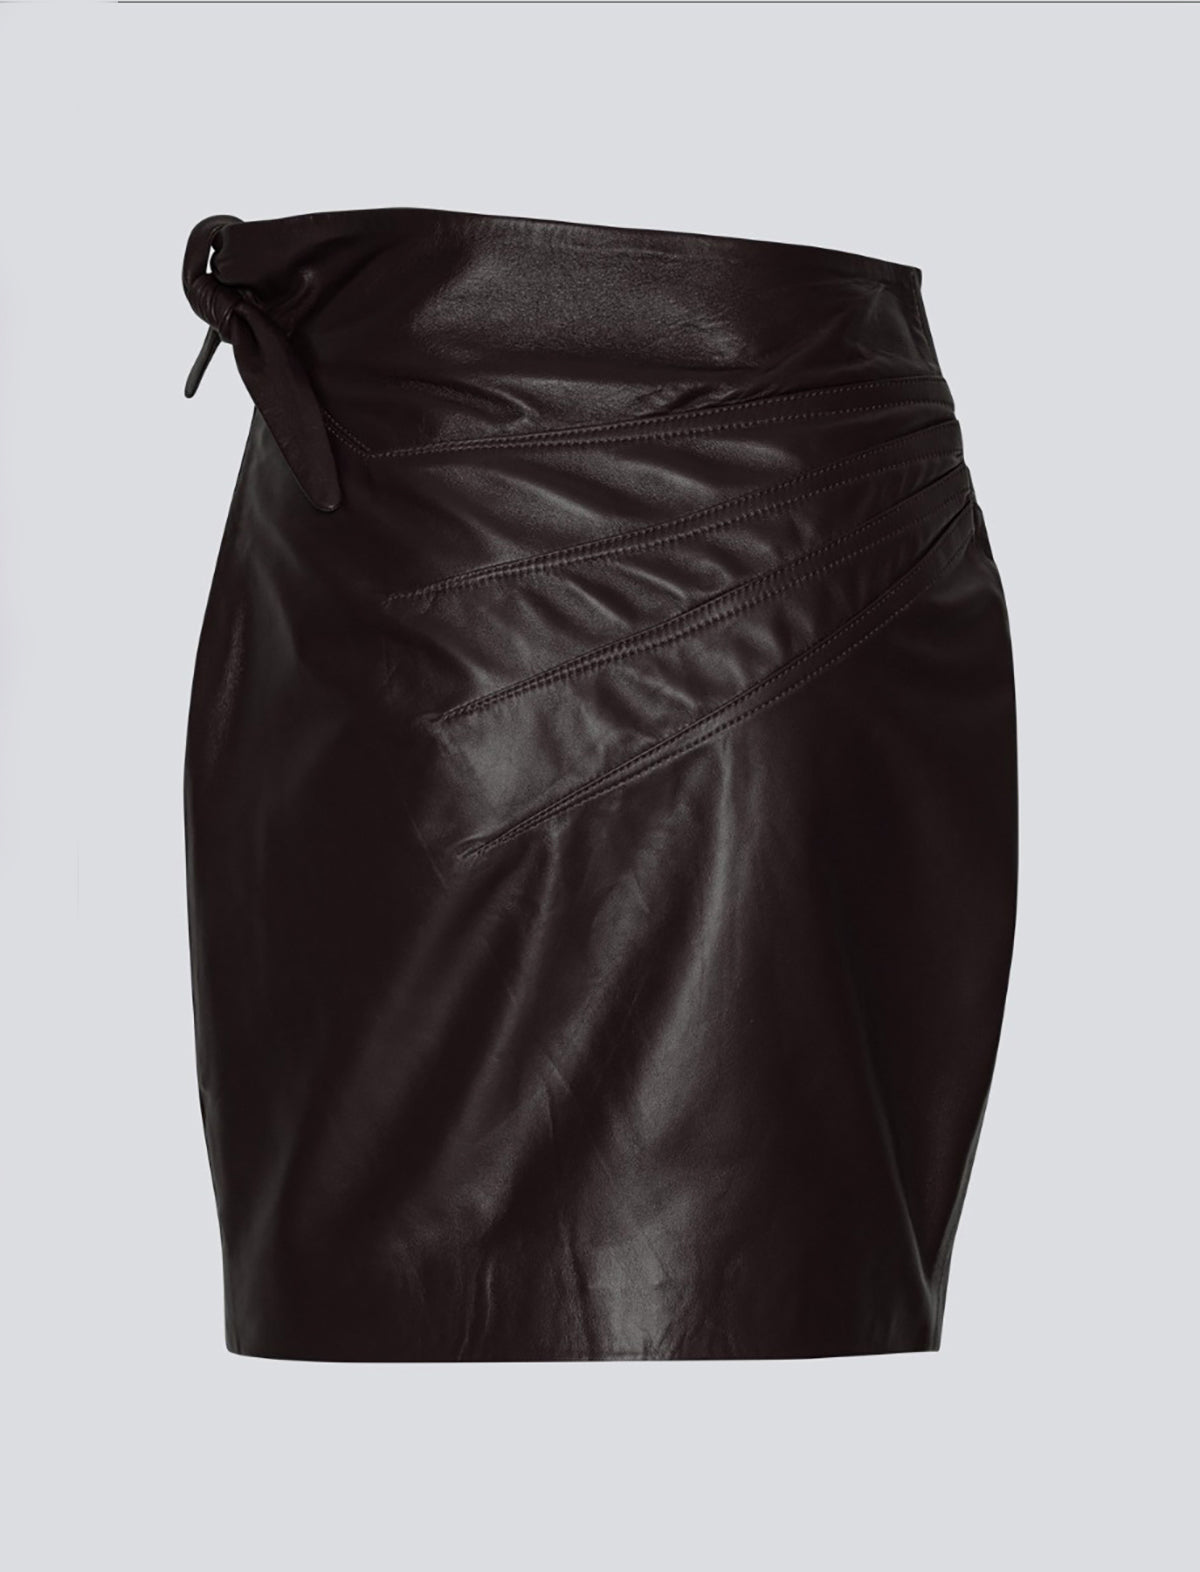 REMAIN Cutline Leather Skirt in Chocolate Plum